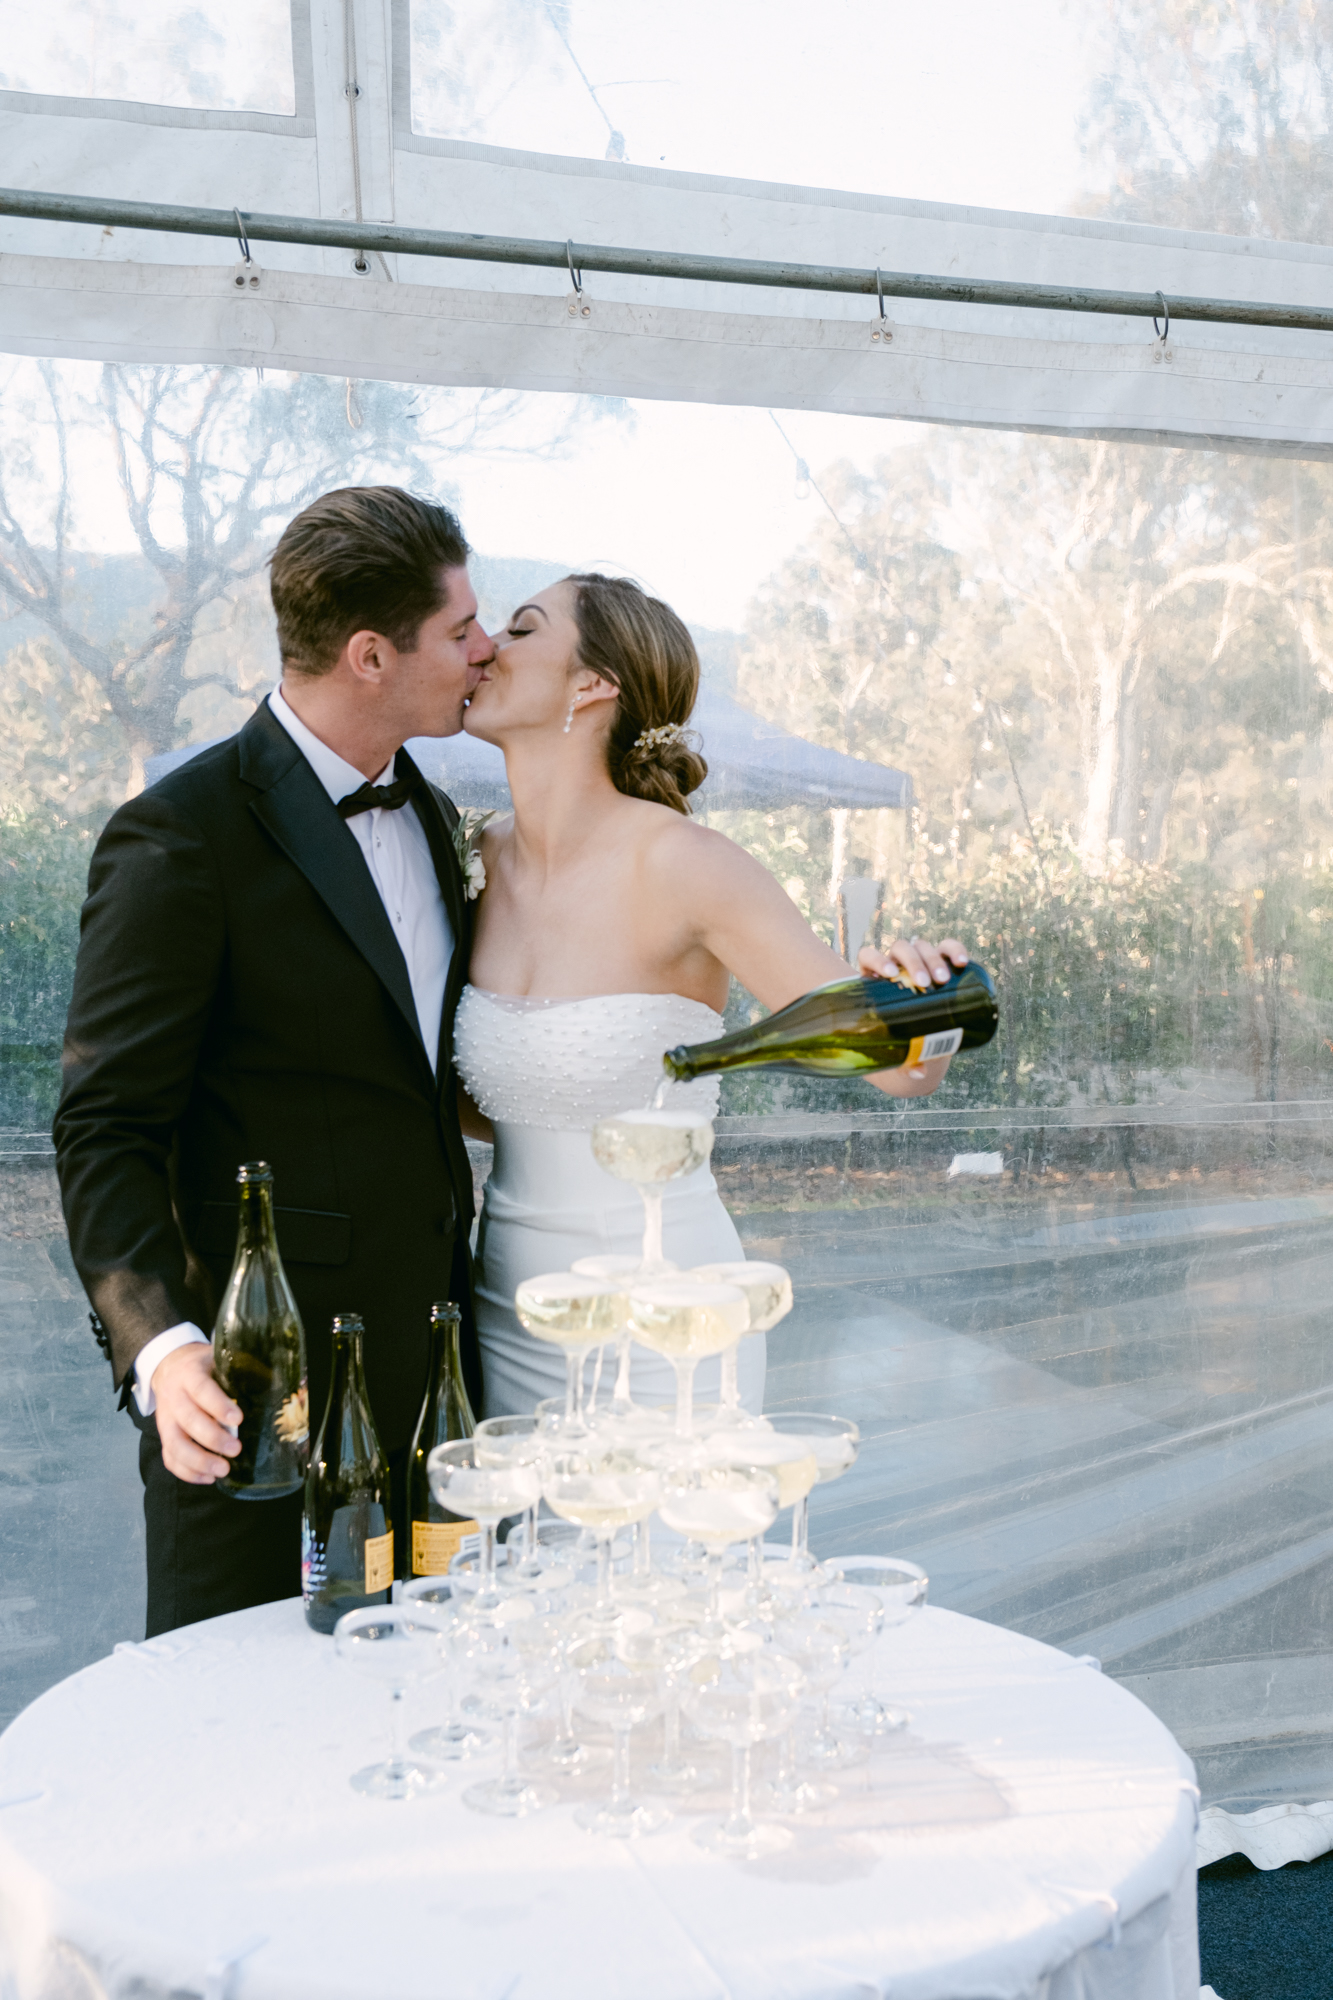 Bride and groom celebrating thier wedding with a champagne tower at the receptions in Bowral Southern highlands wedding venue